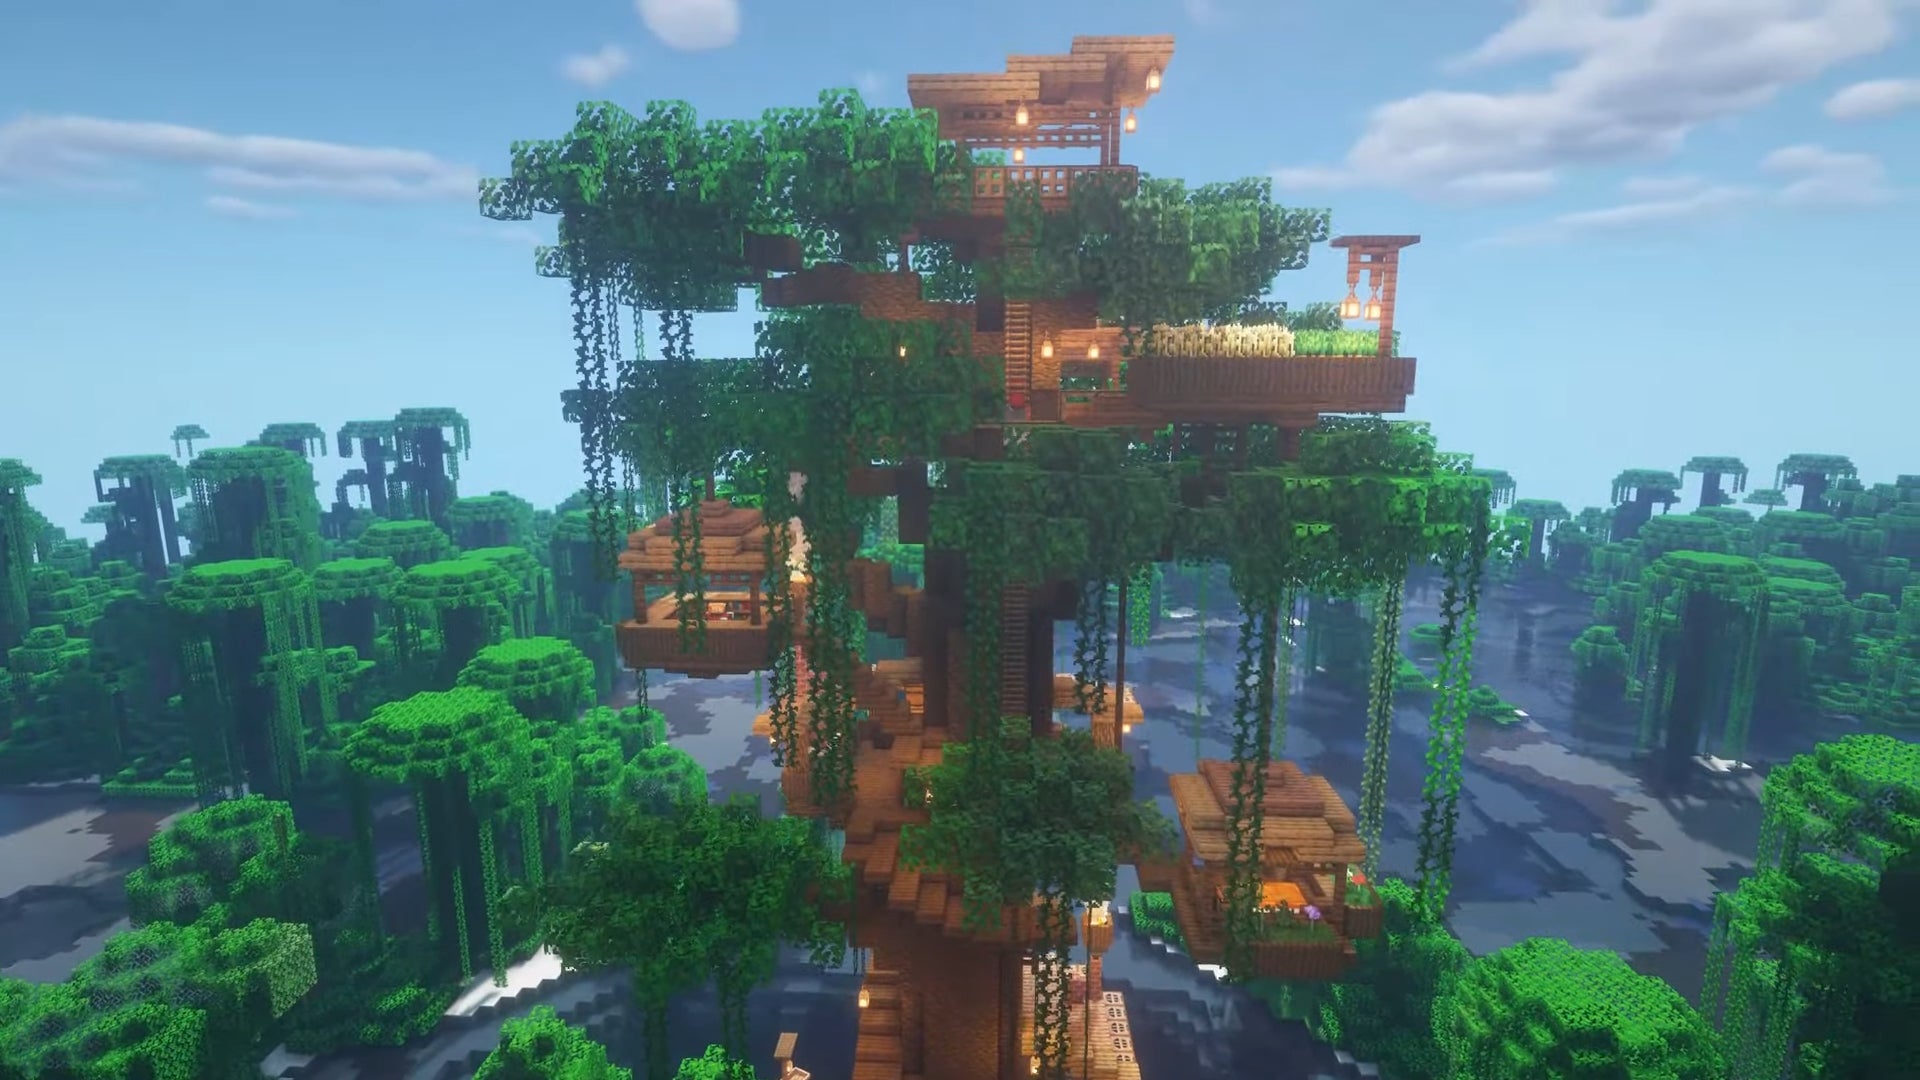 A large jungle treehouse in Minecraft, built by YouTuber DiddiHD.